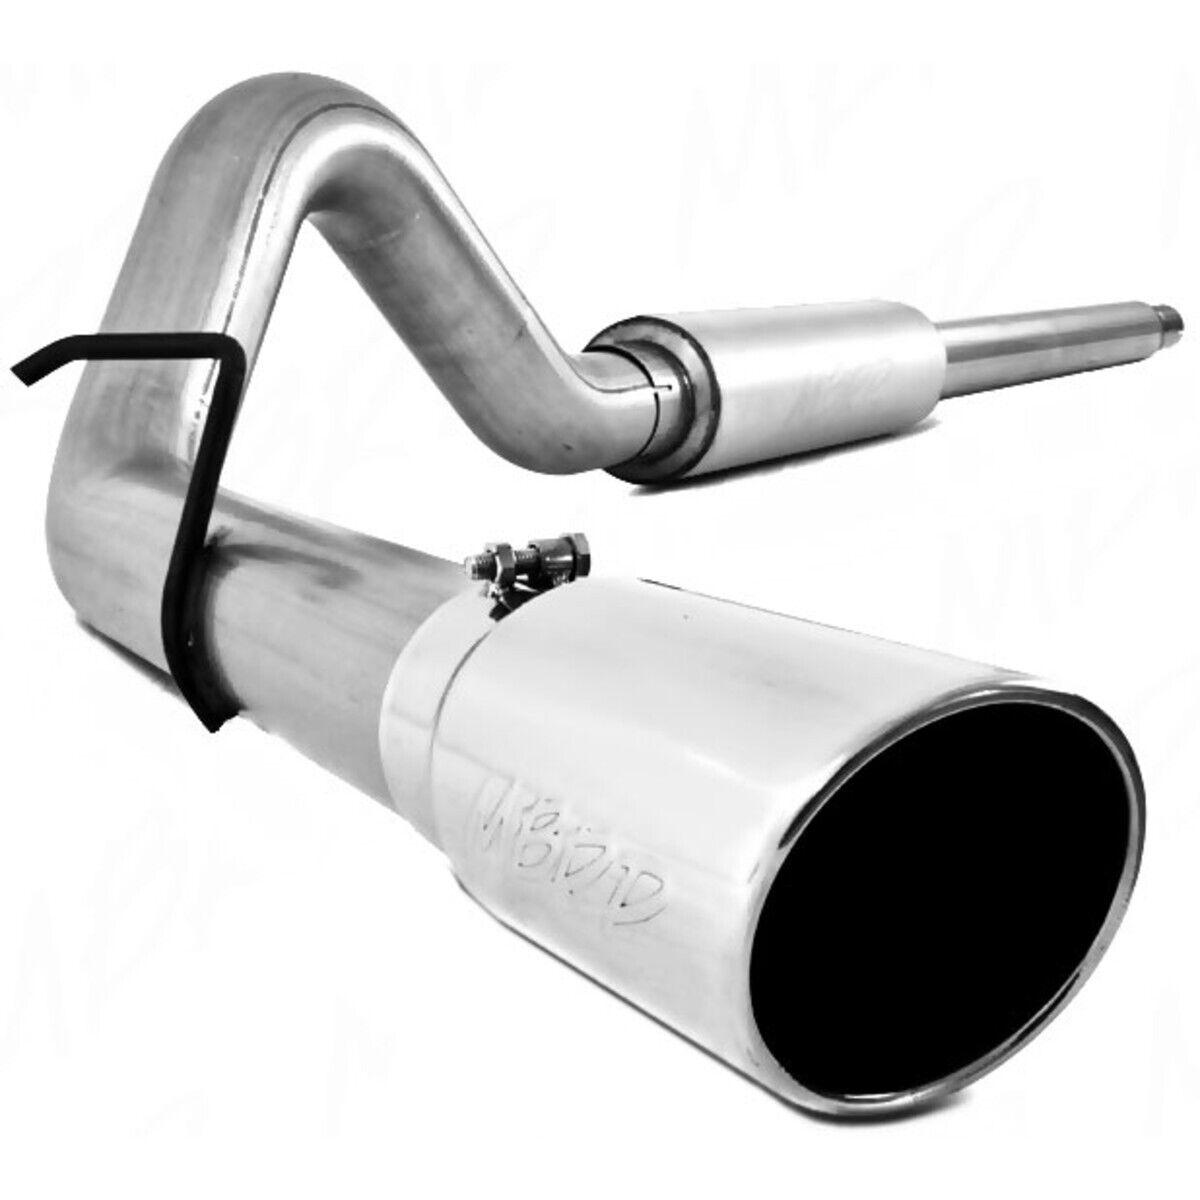 S5206AL MBRP Exhaust System for F250 Truck F350 Ford F-250 Super Duty F-350